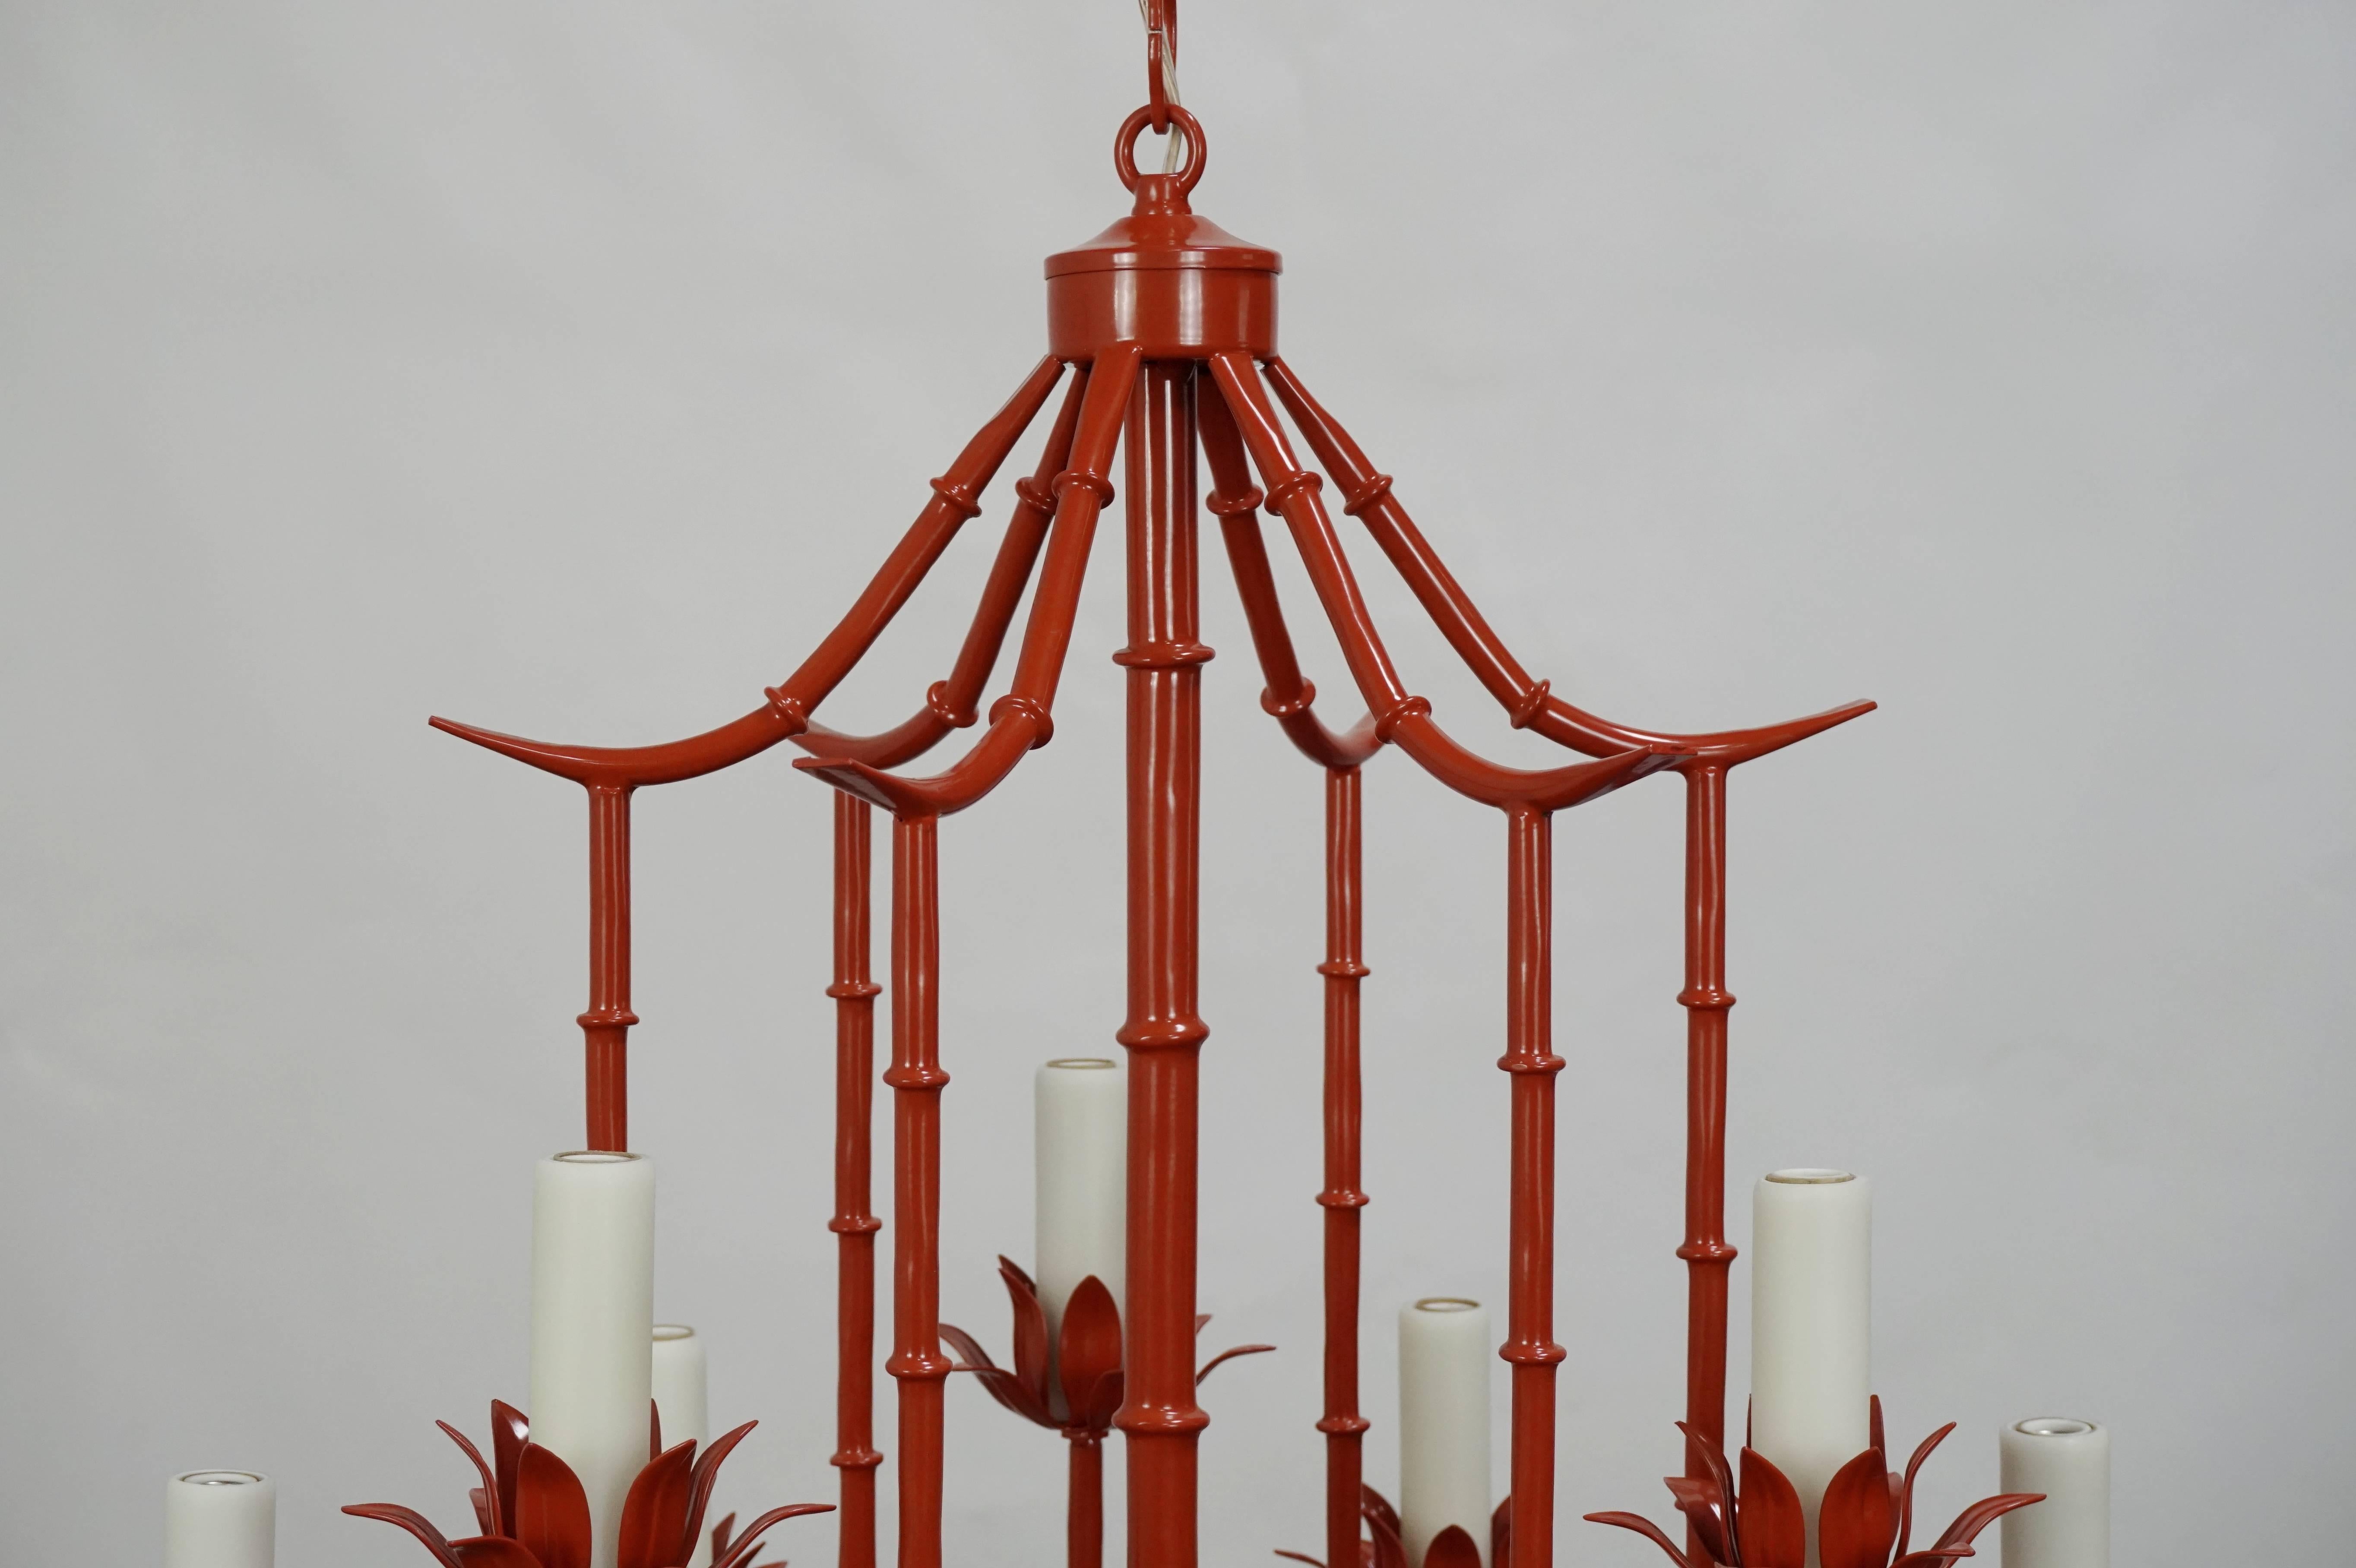 Nine light coral colored faux bamboo pagoda chandelier. Newly rewired and refinished, this vintage chandelier has a fresh Classic look. Smooth ivory resin candle covers will allow for a high wattage without ware.
UL listing available for an